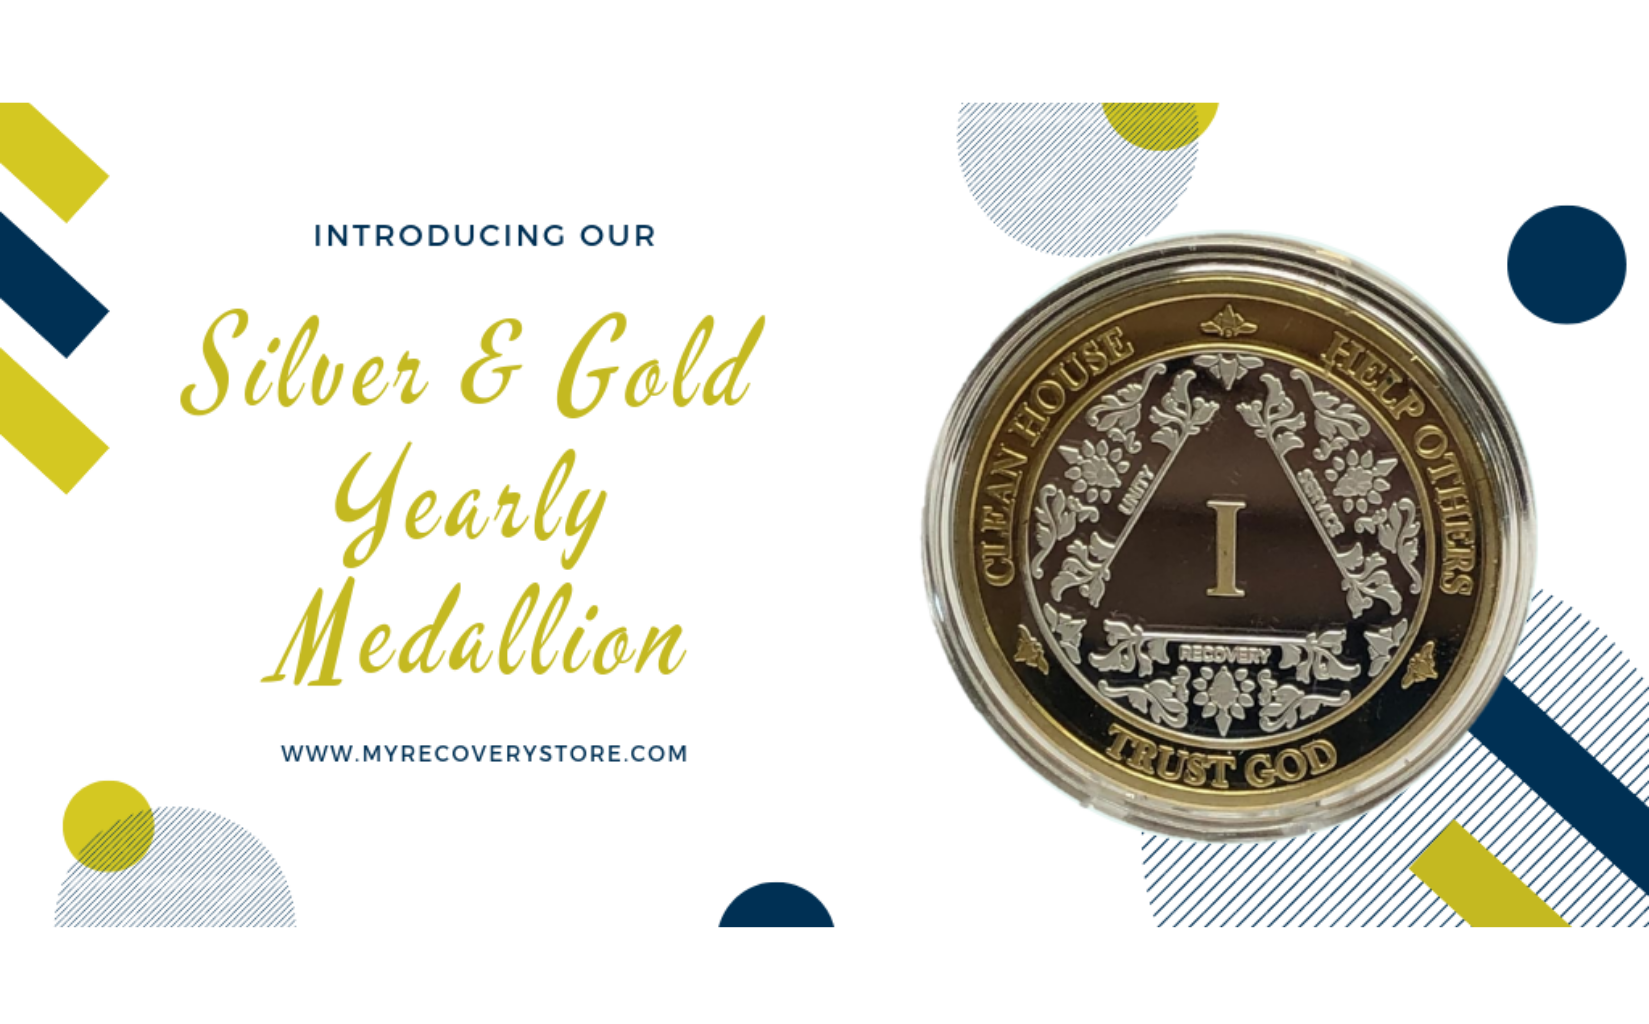 Introducing the Silver & Gold Yearly Medallion